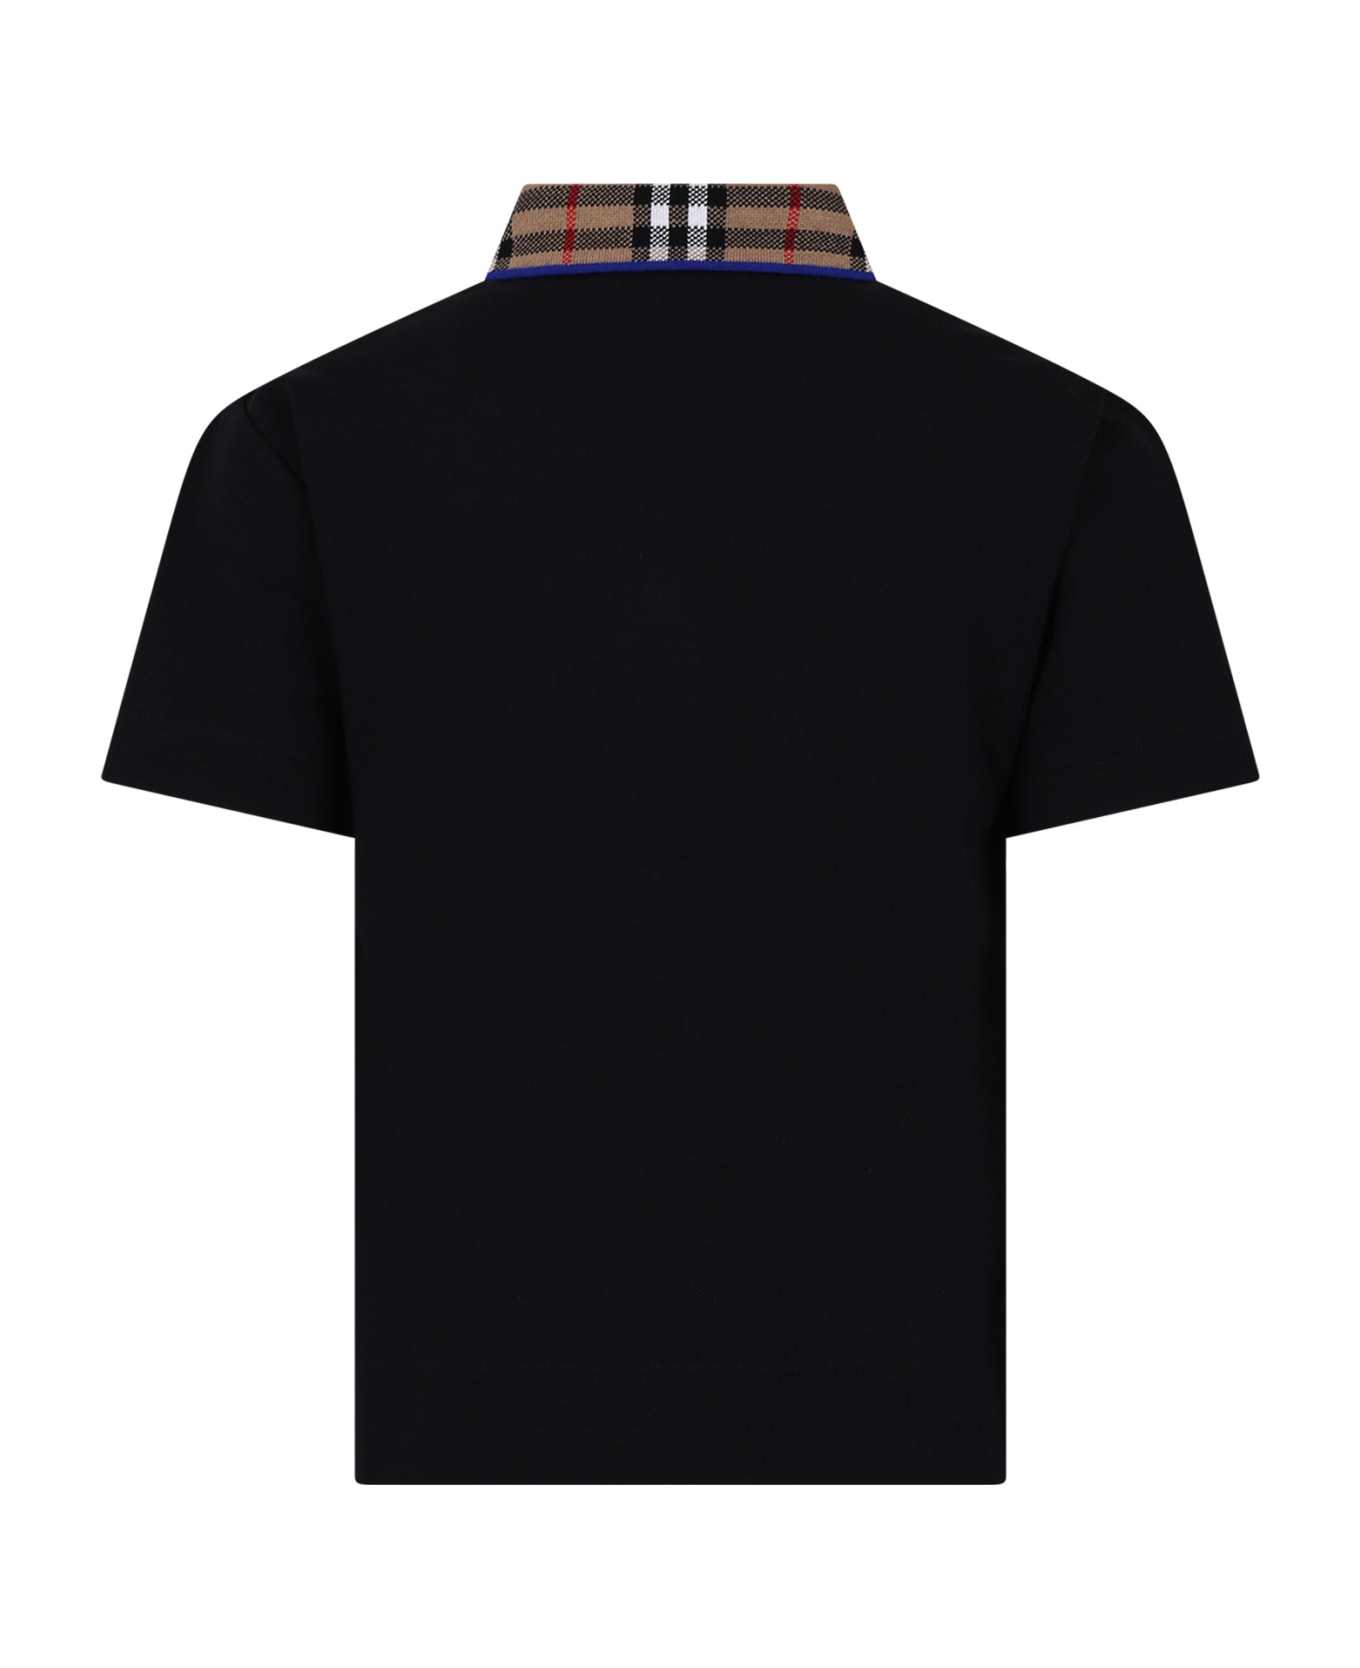 Burberry Black Polo Shirt For Boy With Vintage Check On The Collar - Black